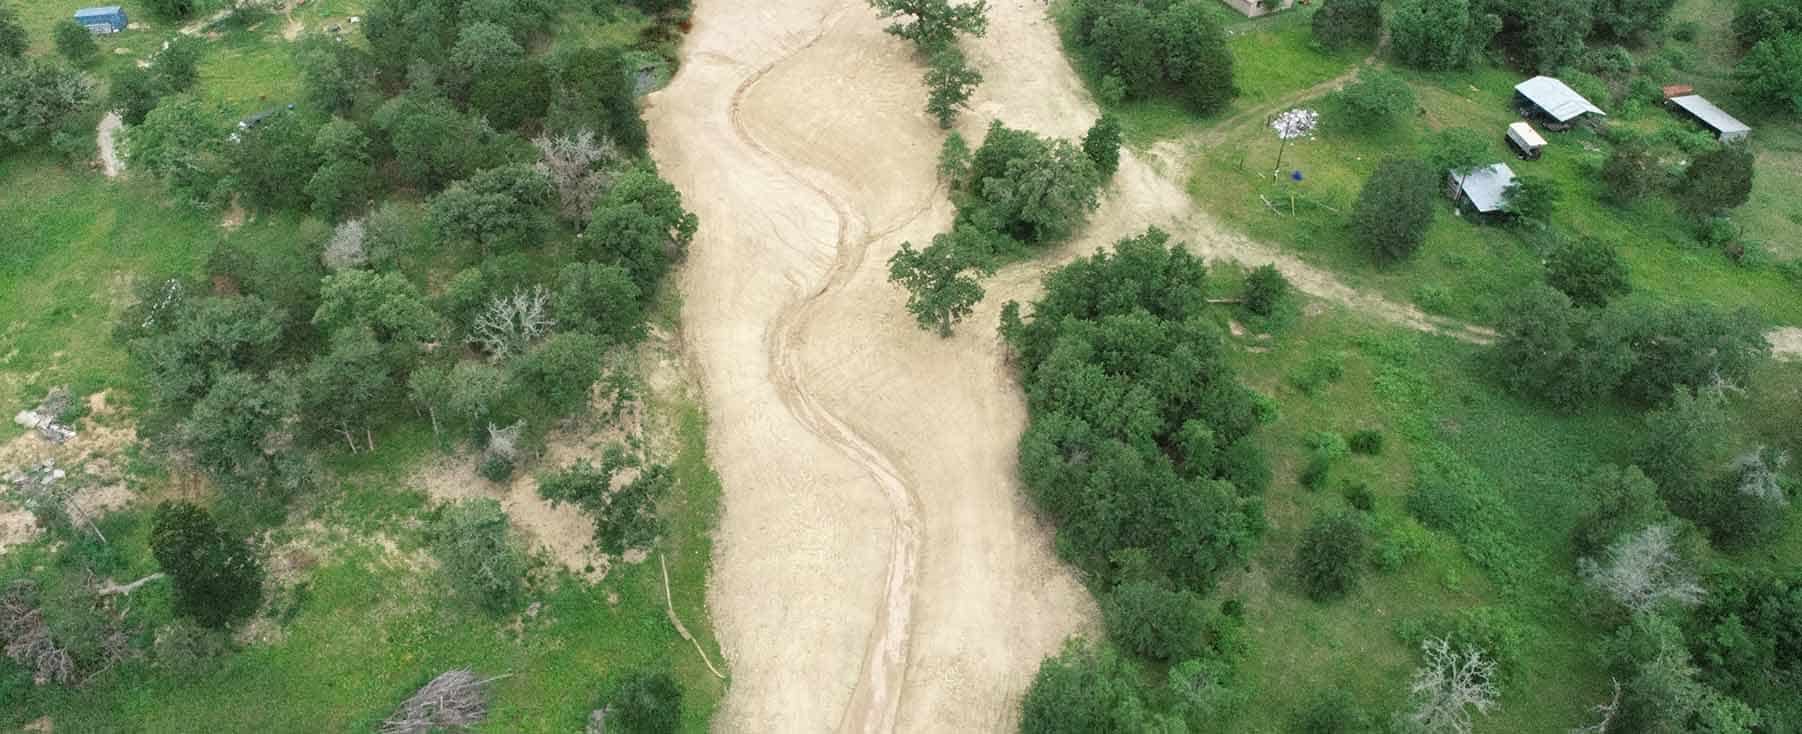 Aerial shot of AML project site showing channel design